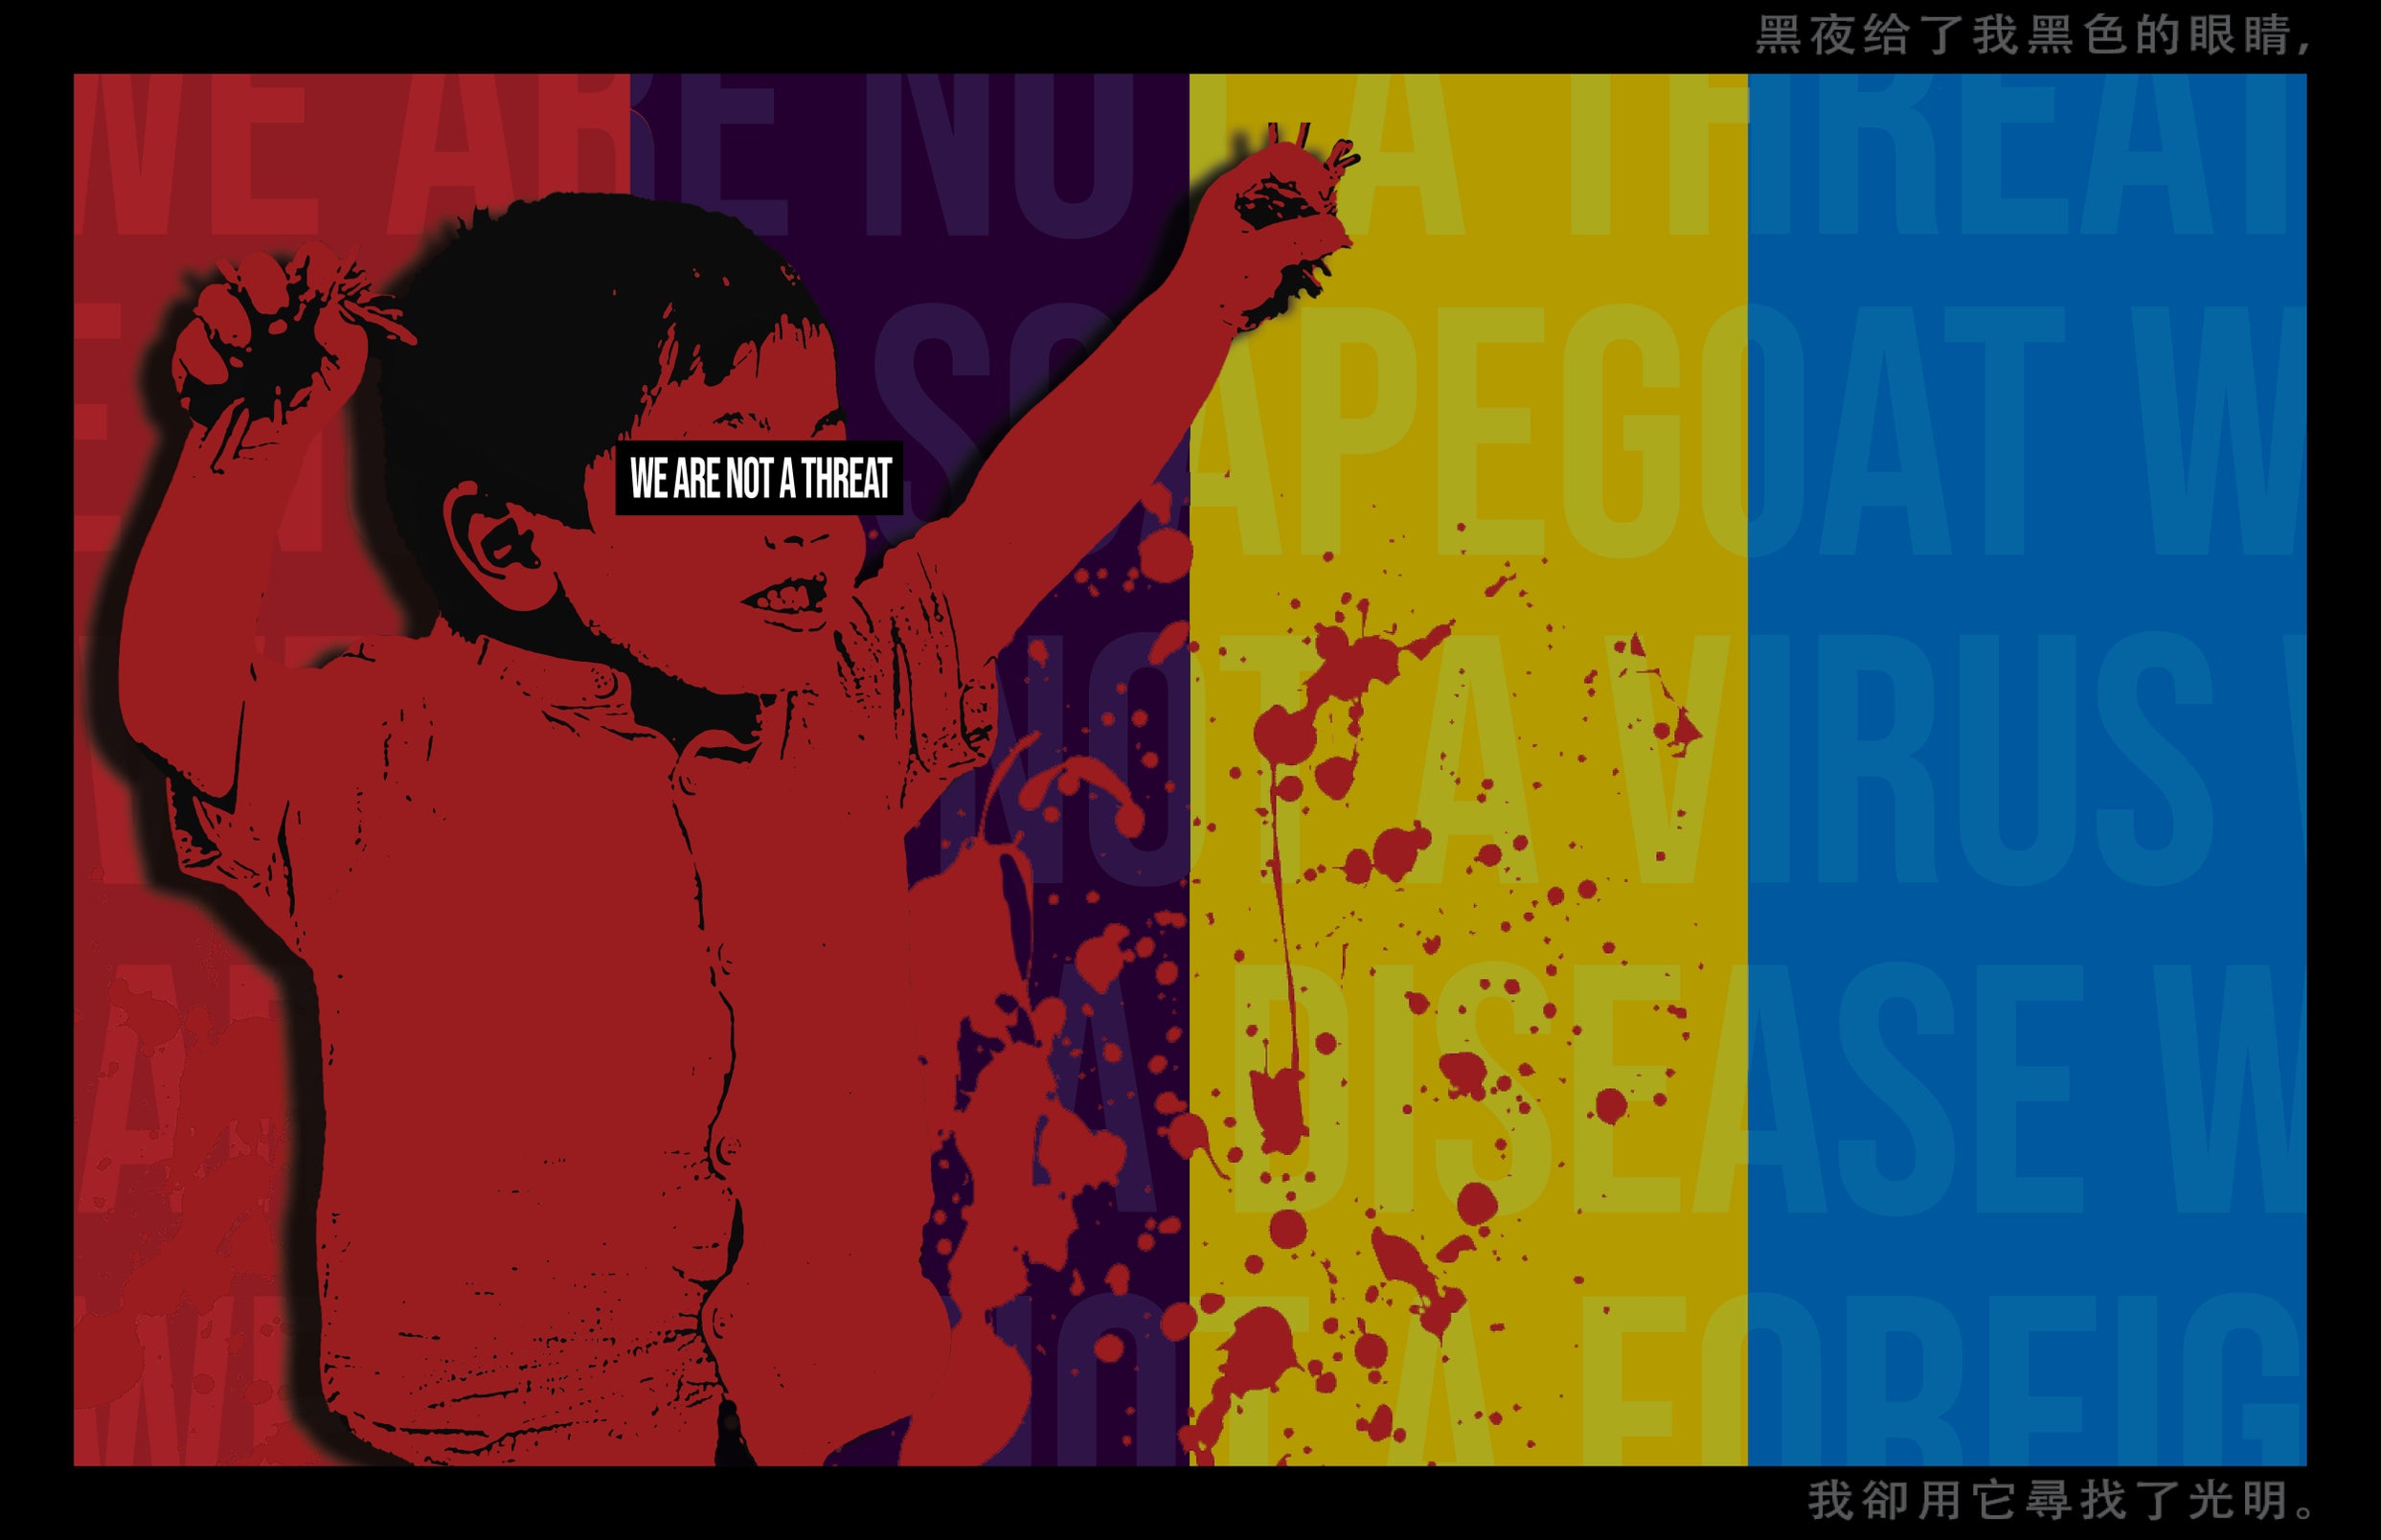 Graphic design image of a child with paint or blood spatter with the words "we are not a threat" over their eyes